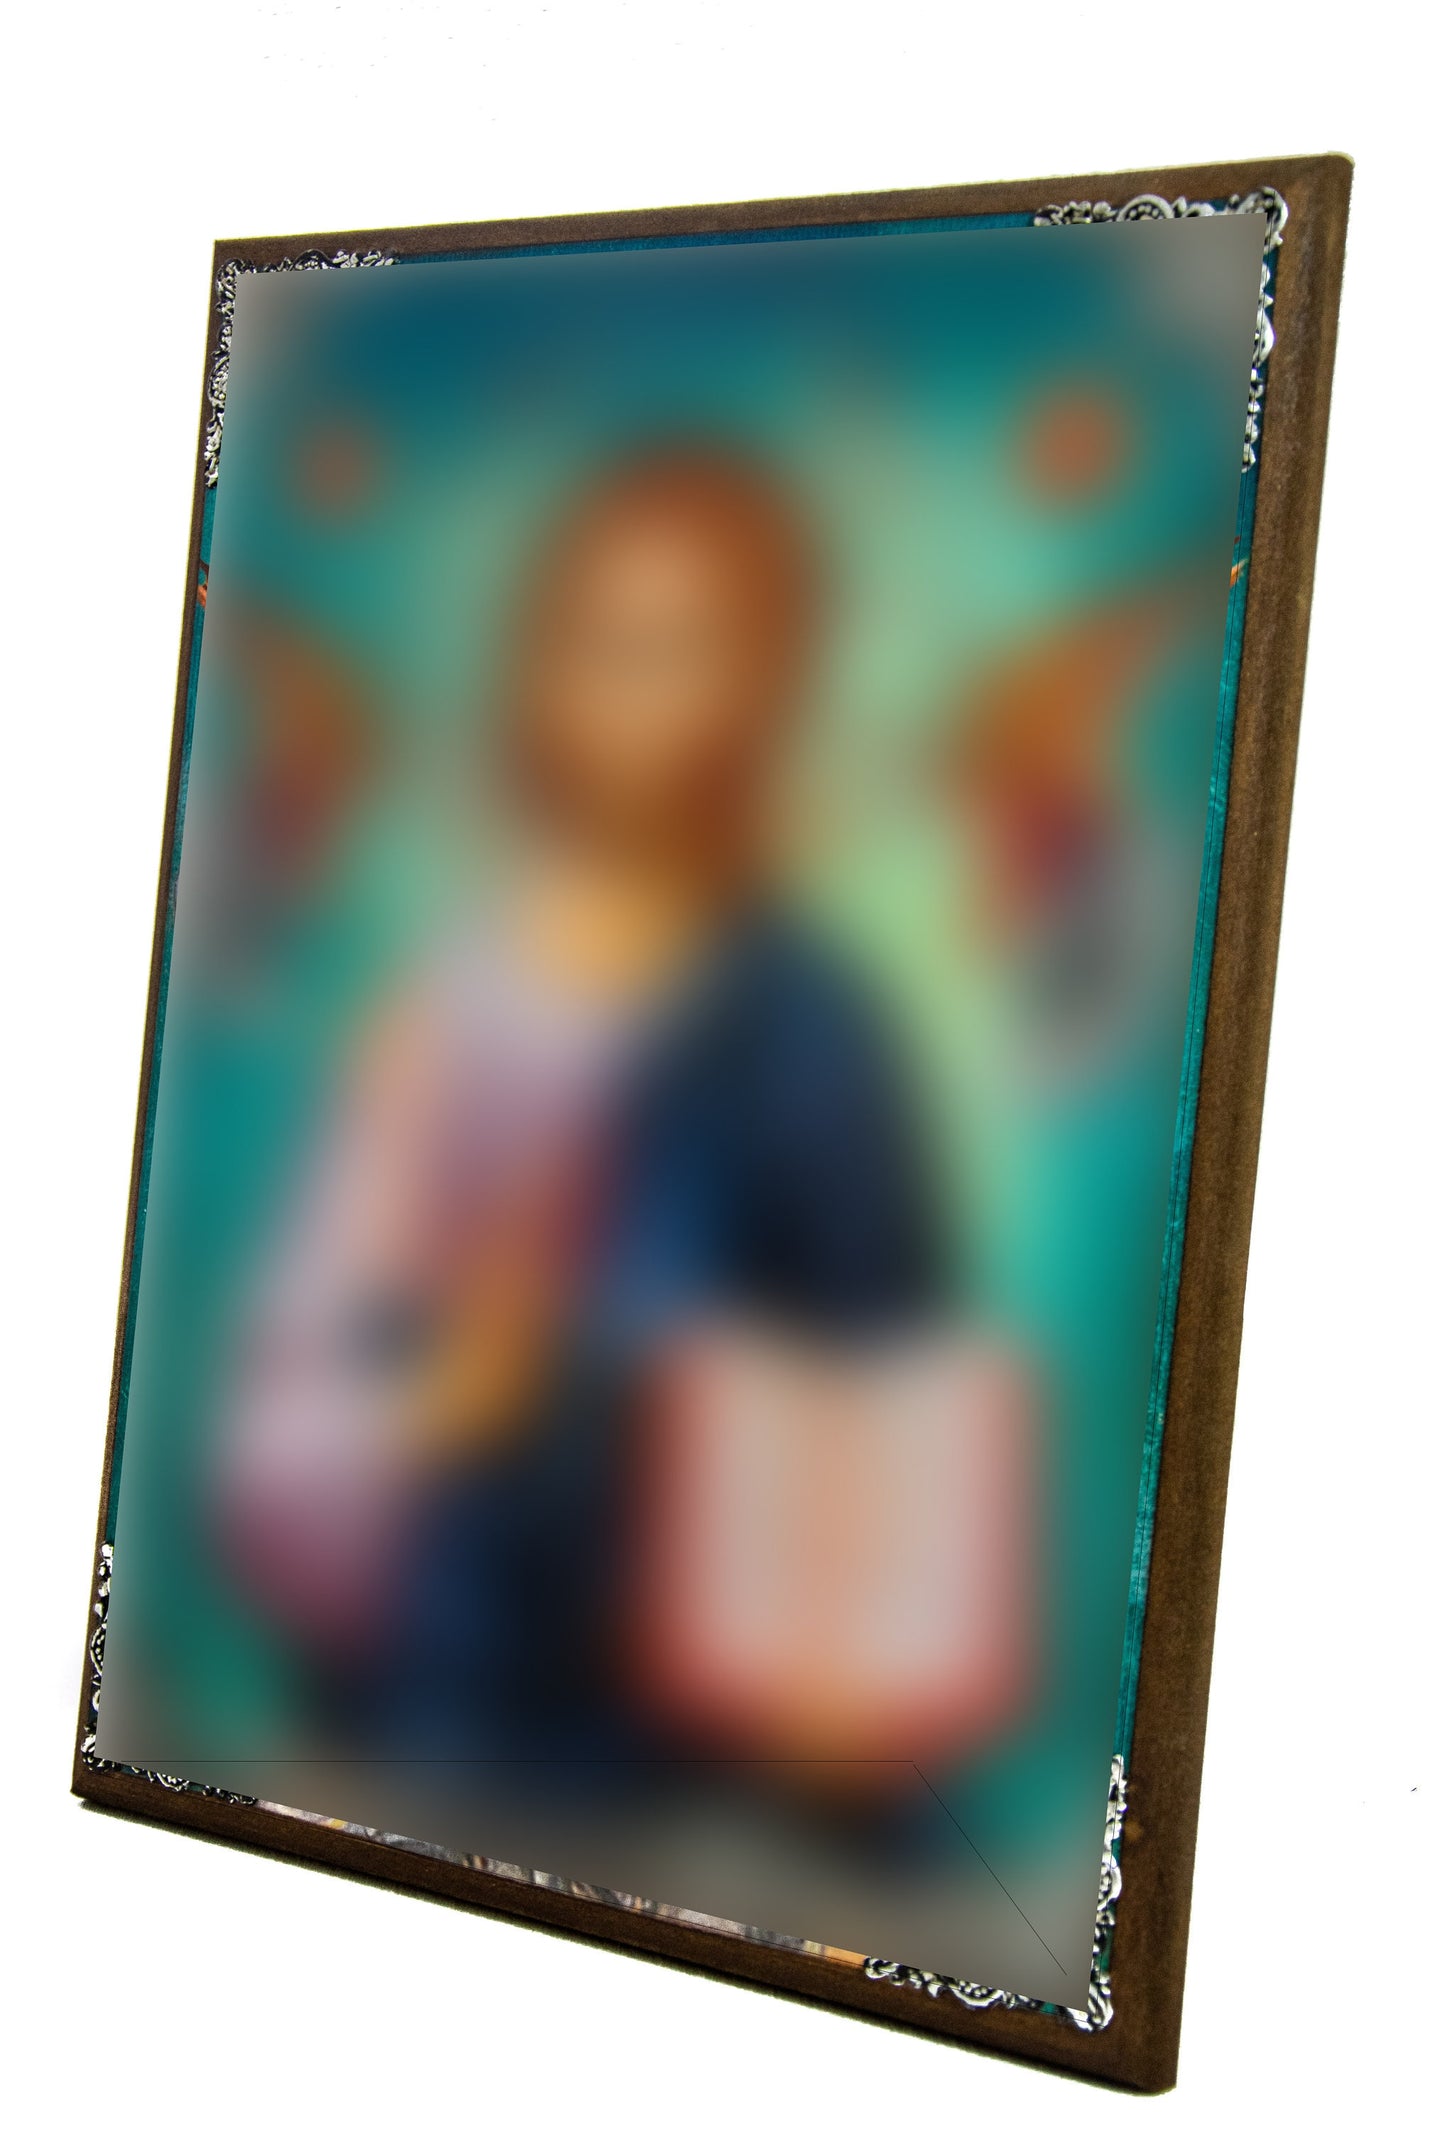 Jesus Christ icon Nymphios, Handmade Greek Orthodox icon of our Lord, Byzantine art wall hanging on wood plaque, religious icon home decor TheHolyArt